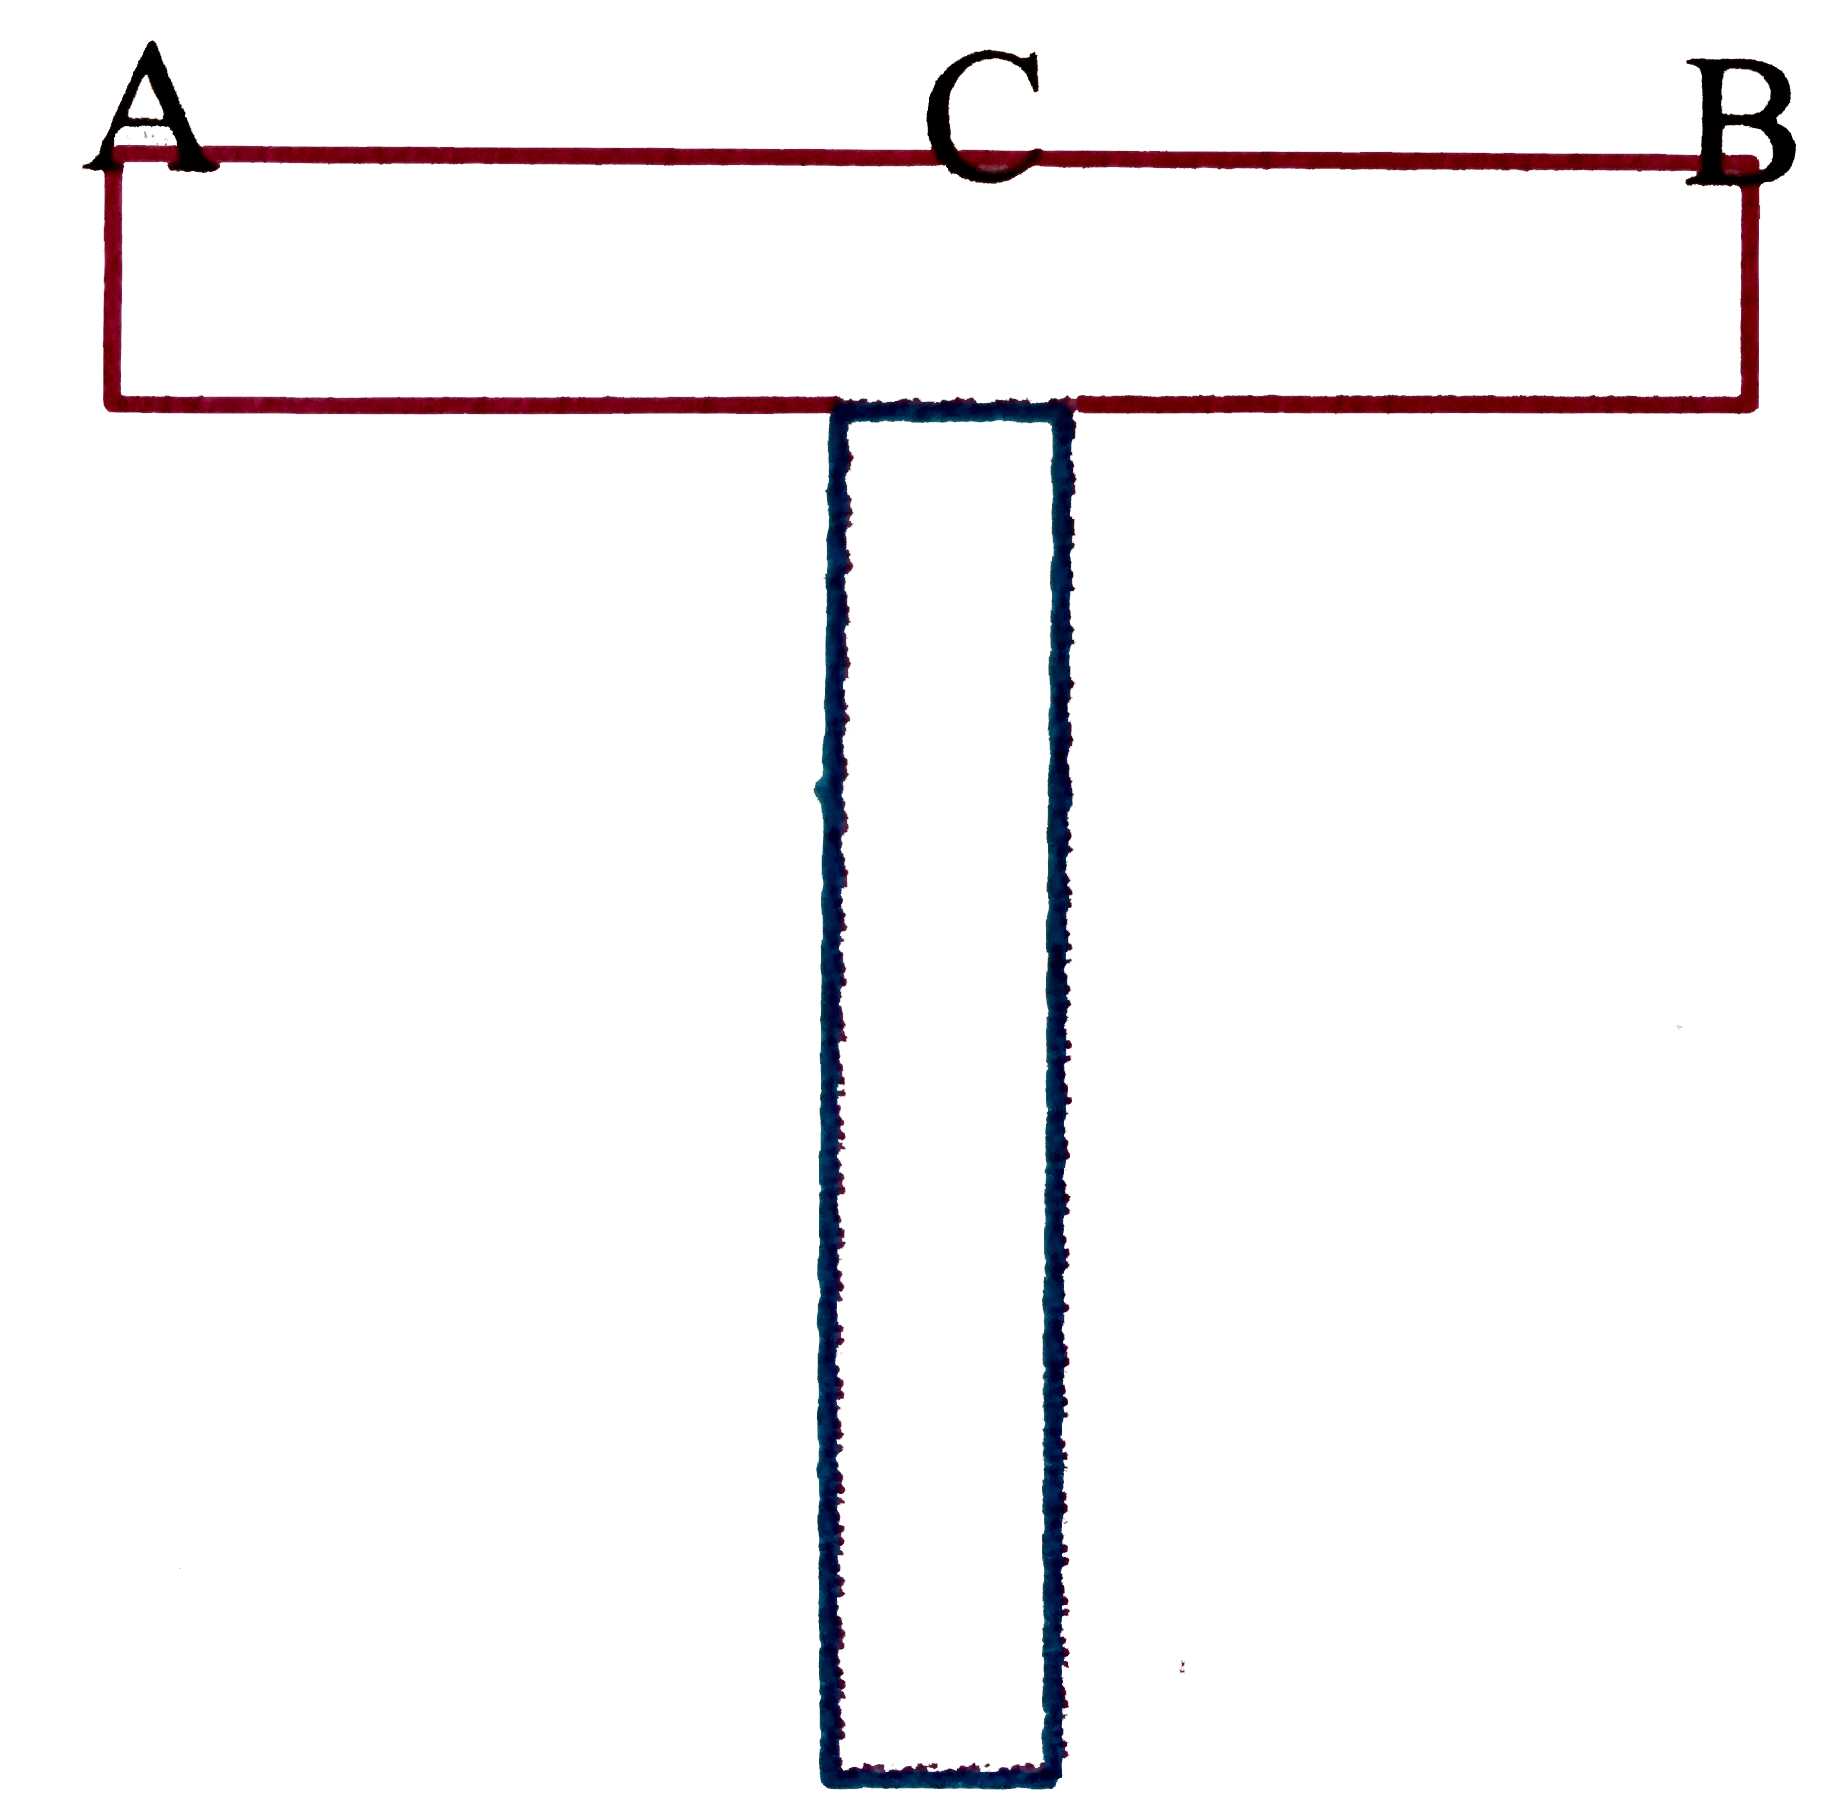 Two identical thin uniform rods of length L each are joined to form T shape as shown in the figure. The distance of centre of mass from D is